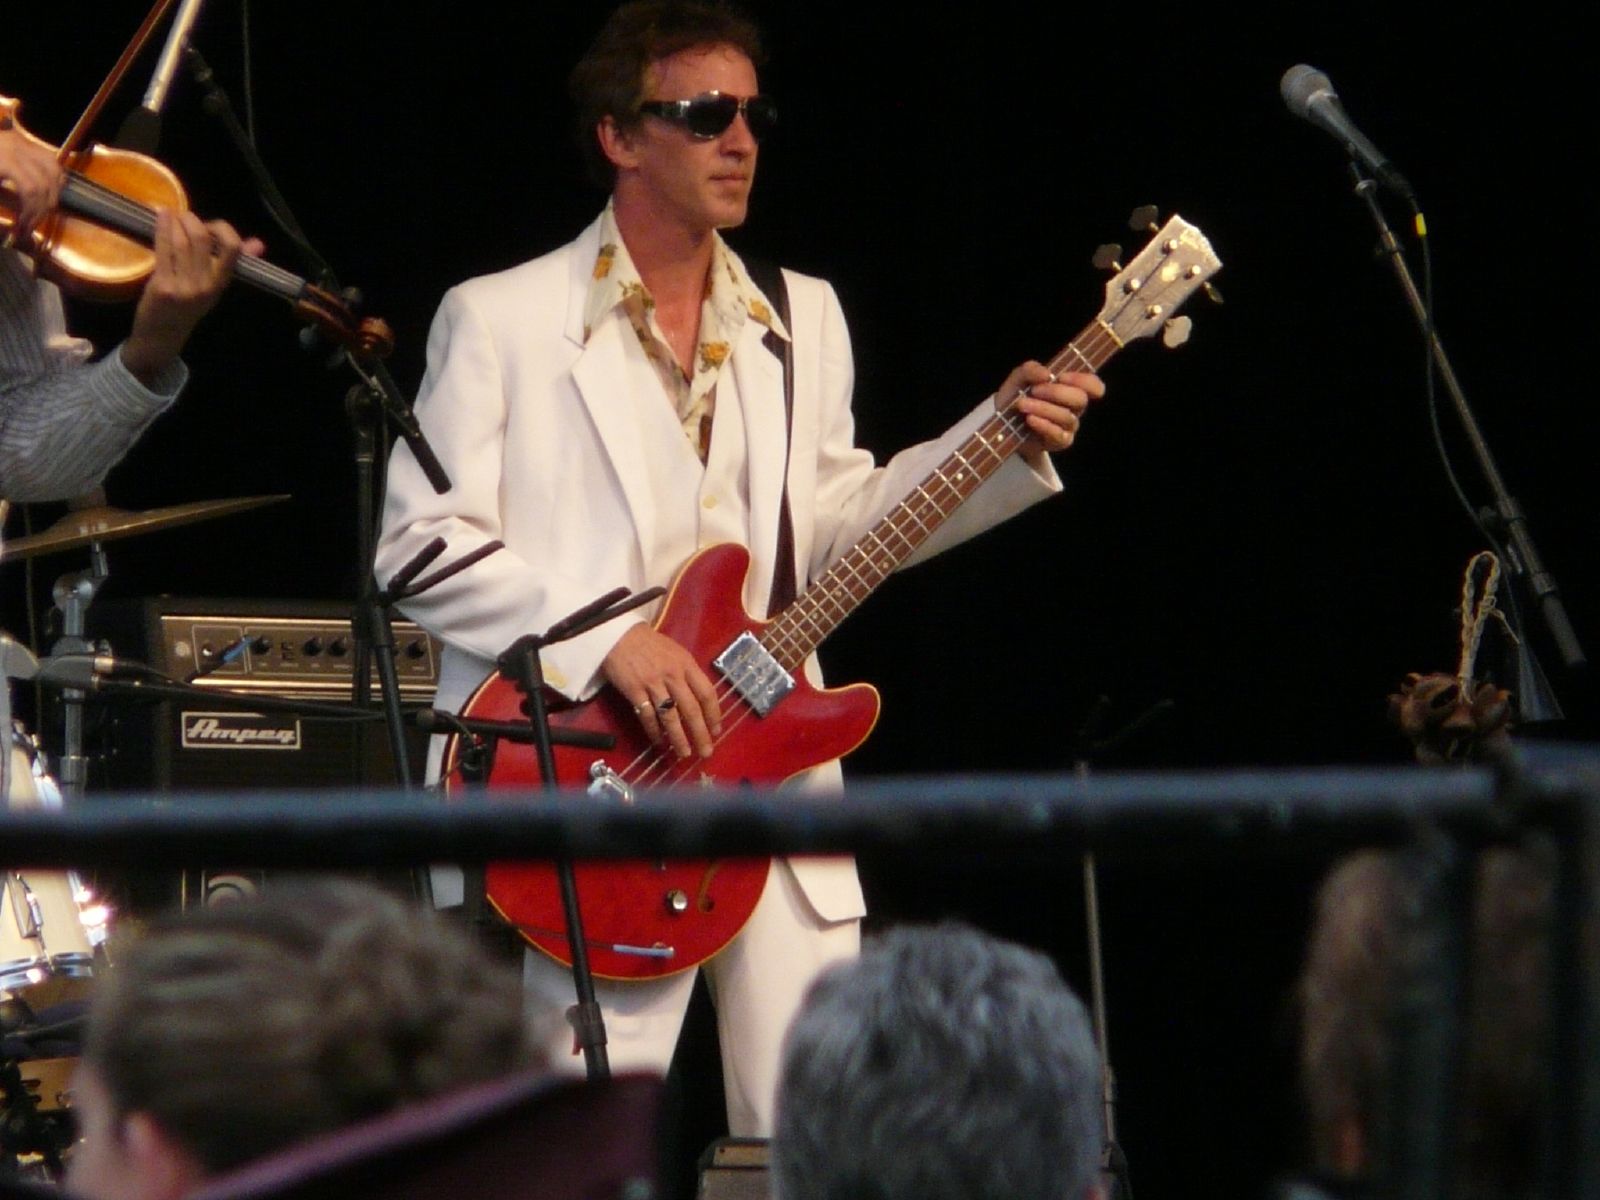 a man in a white suit and sunglasses playing an electric guitar